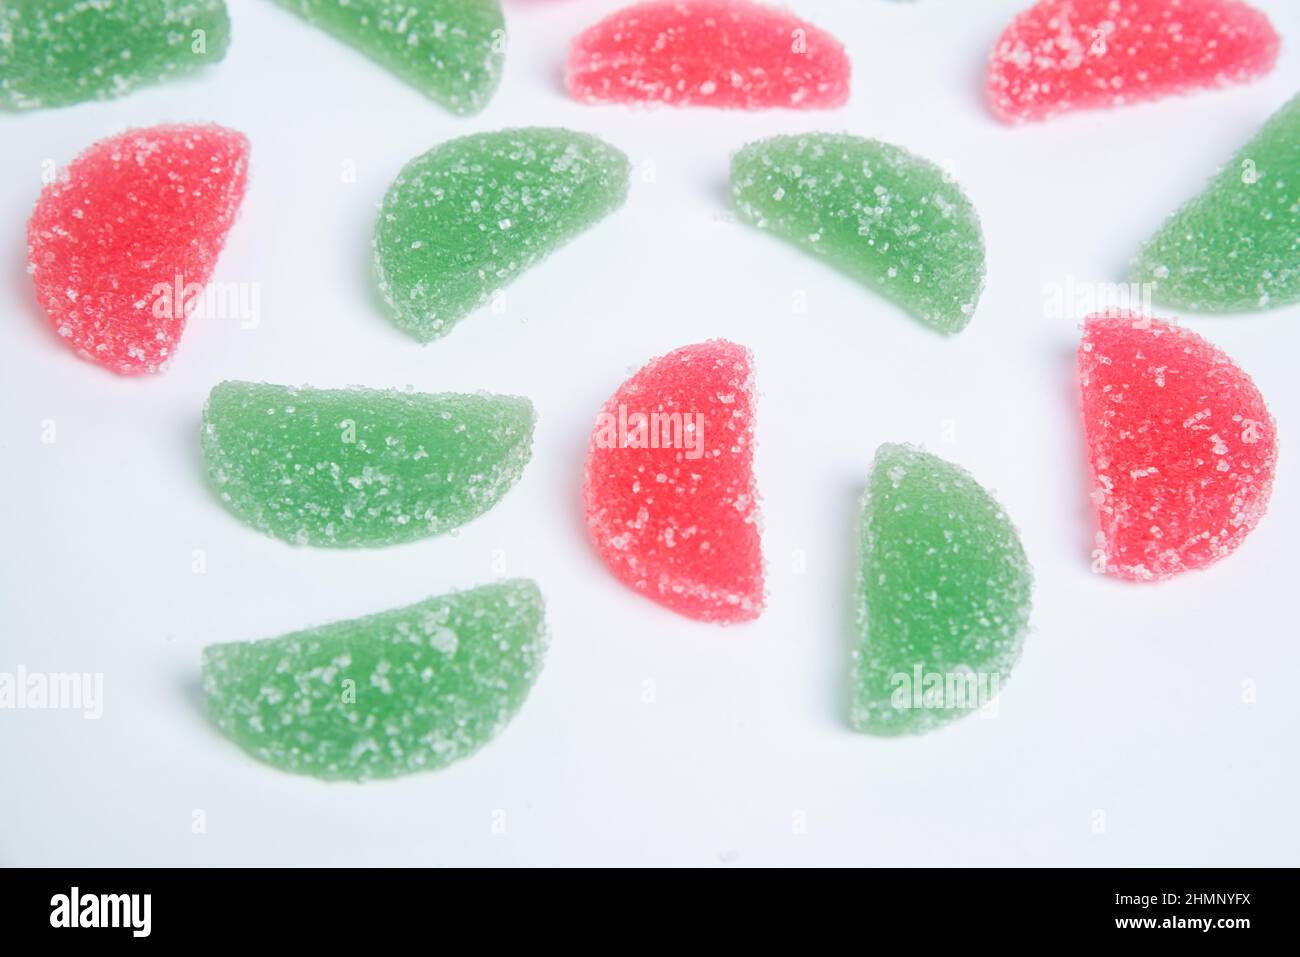 Sweet pattern, marmalade jelly candies of different colors on a white background with sugar crystals. Stock Photo